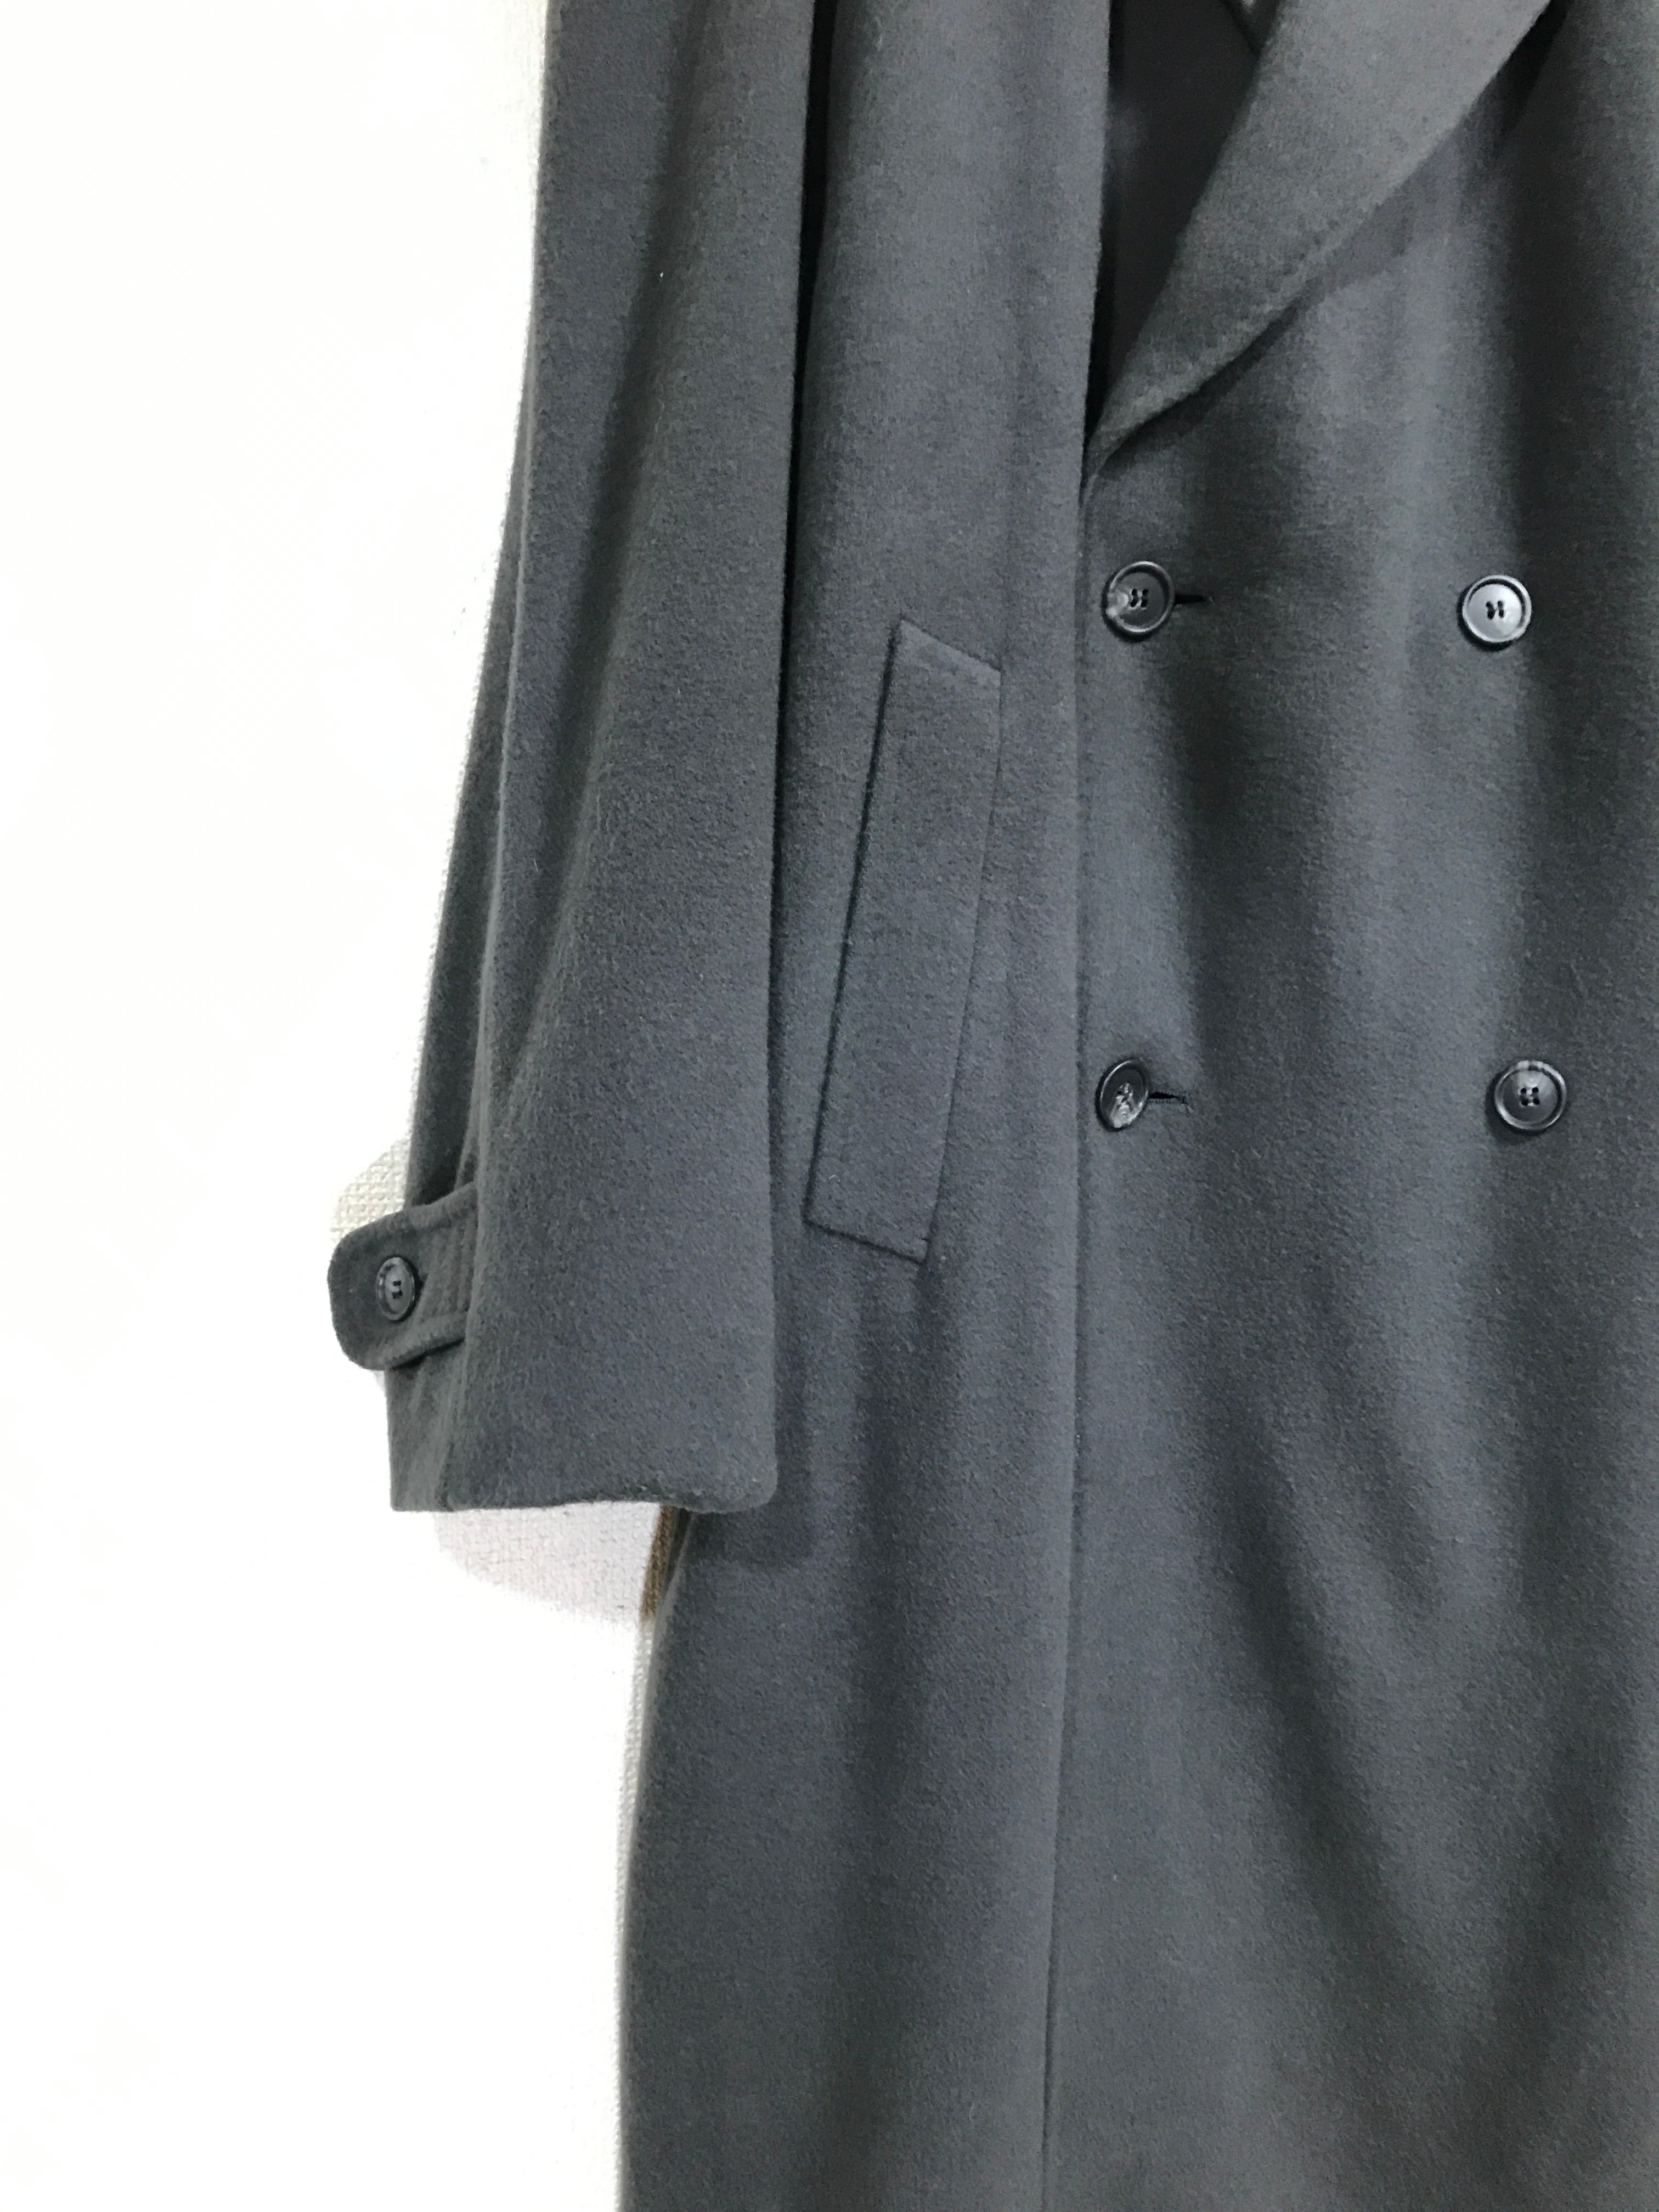 80’s Valentino wool/cashmere double breasted chesterfield coat